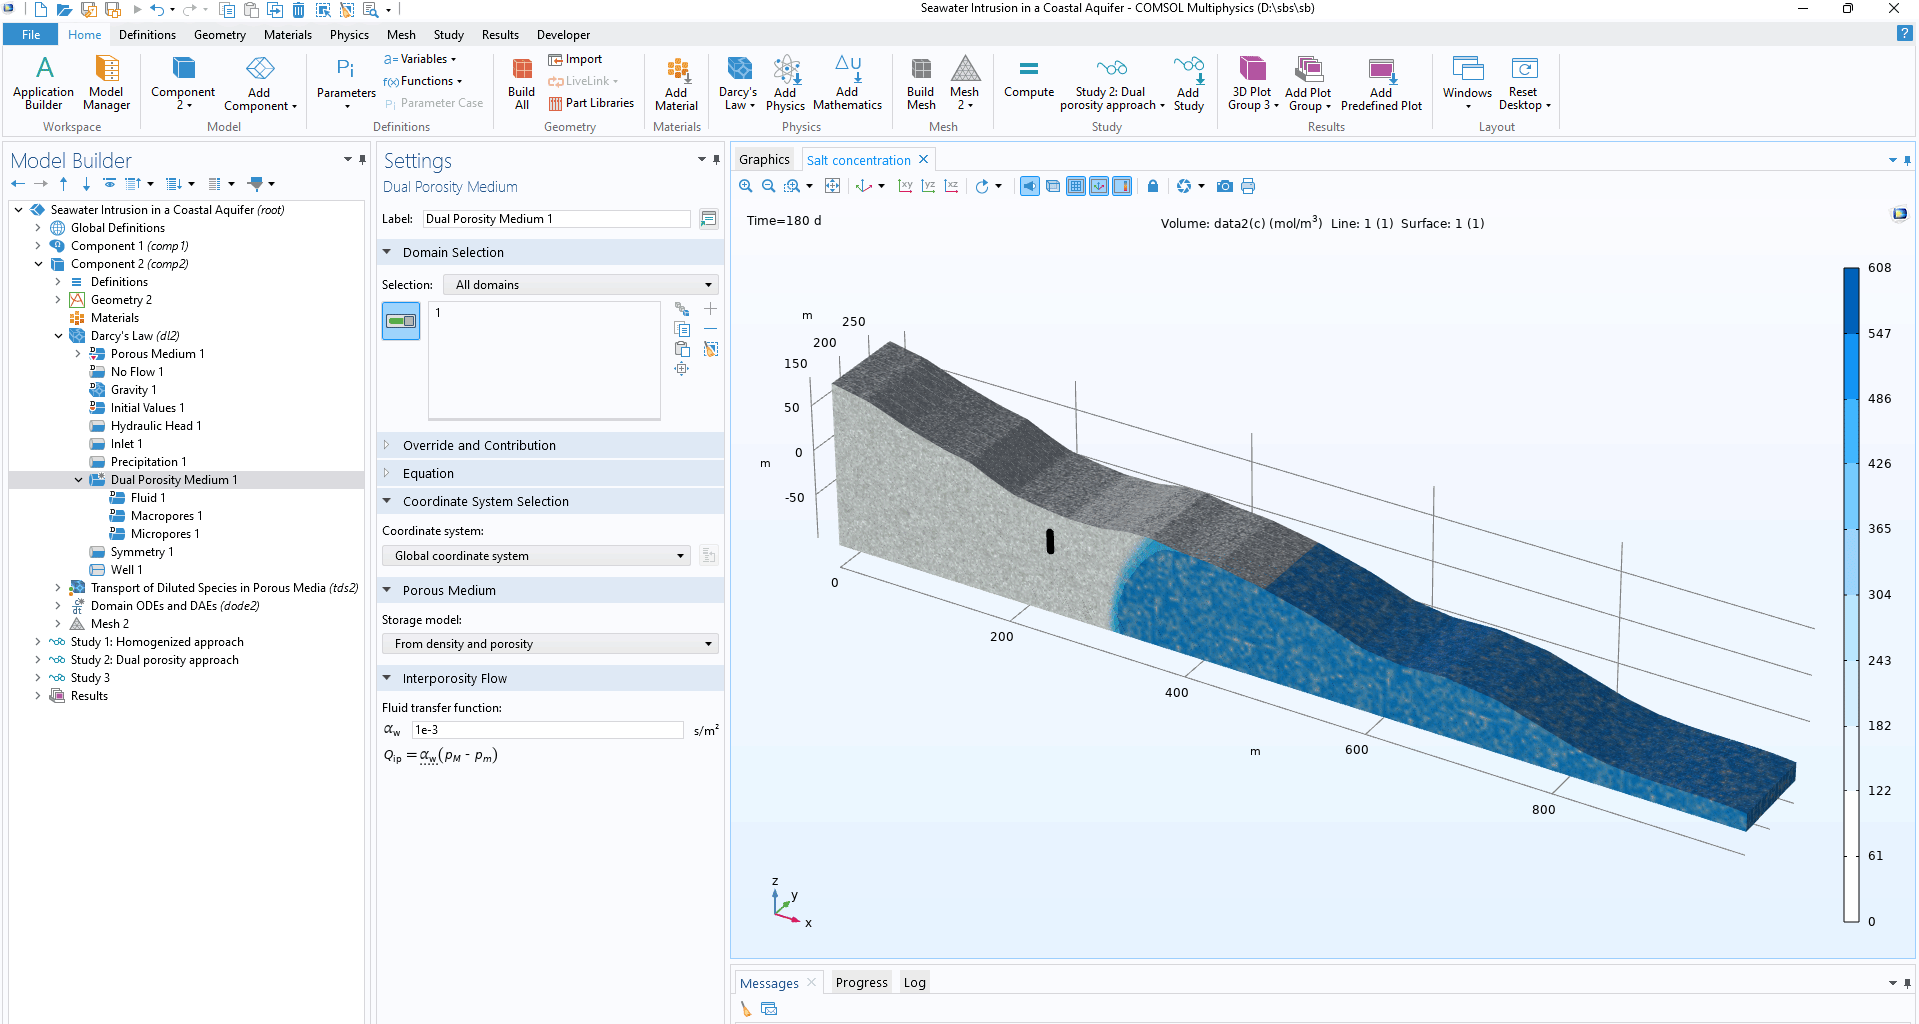 The COMSOL Multiphysics UI showing the Model Builder with the Dual Porosity Medium node highlighted, the corresponding Settings window, and the Seawater Intrusion in a Coastal Aquifer model in the Graphics window.